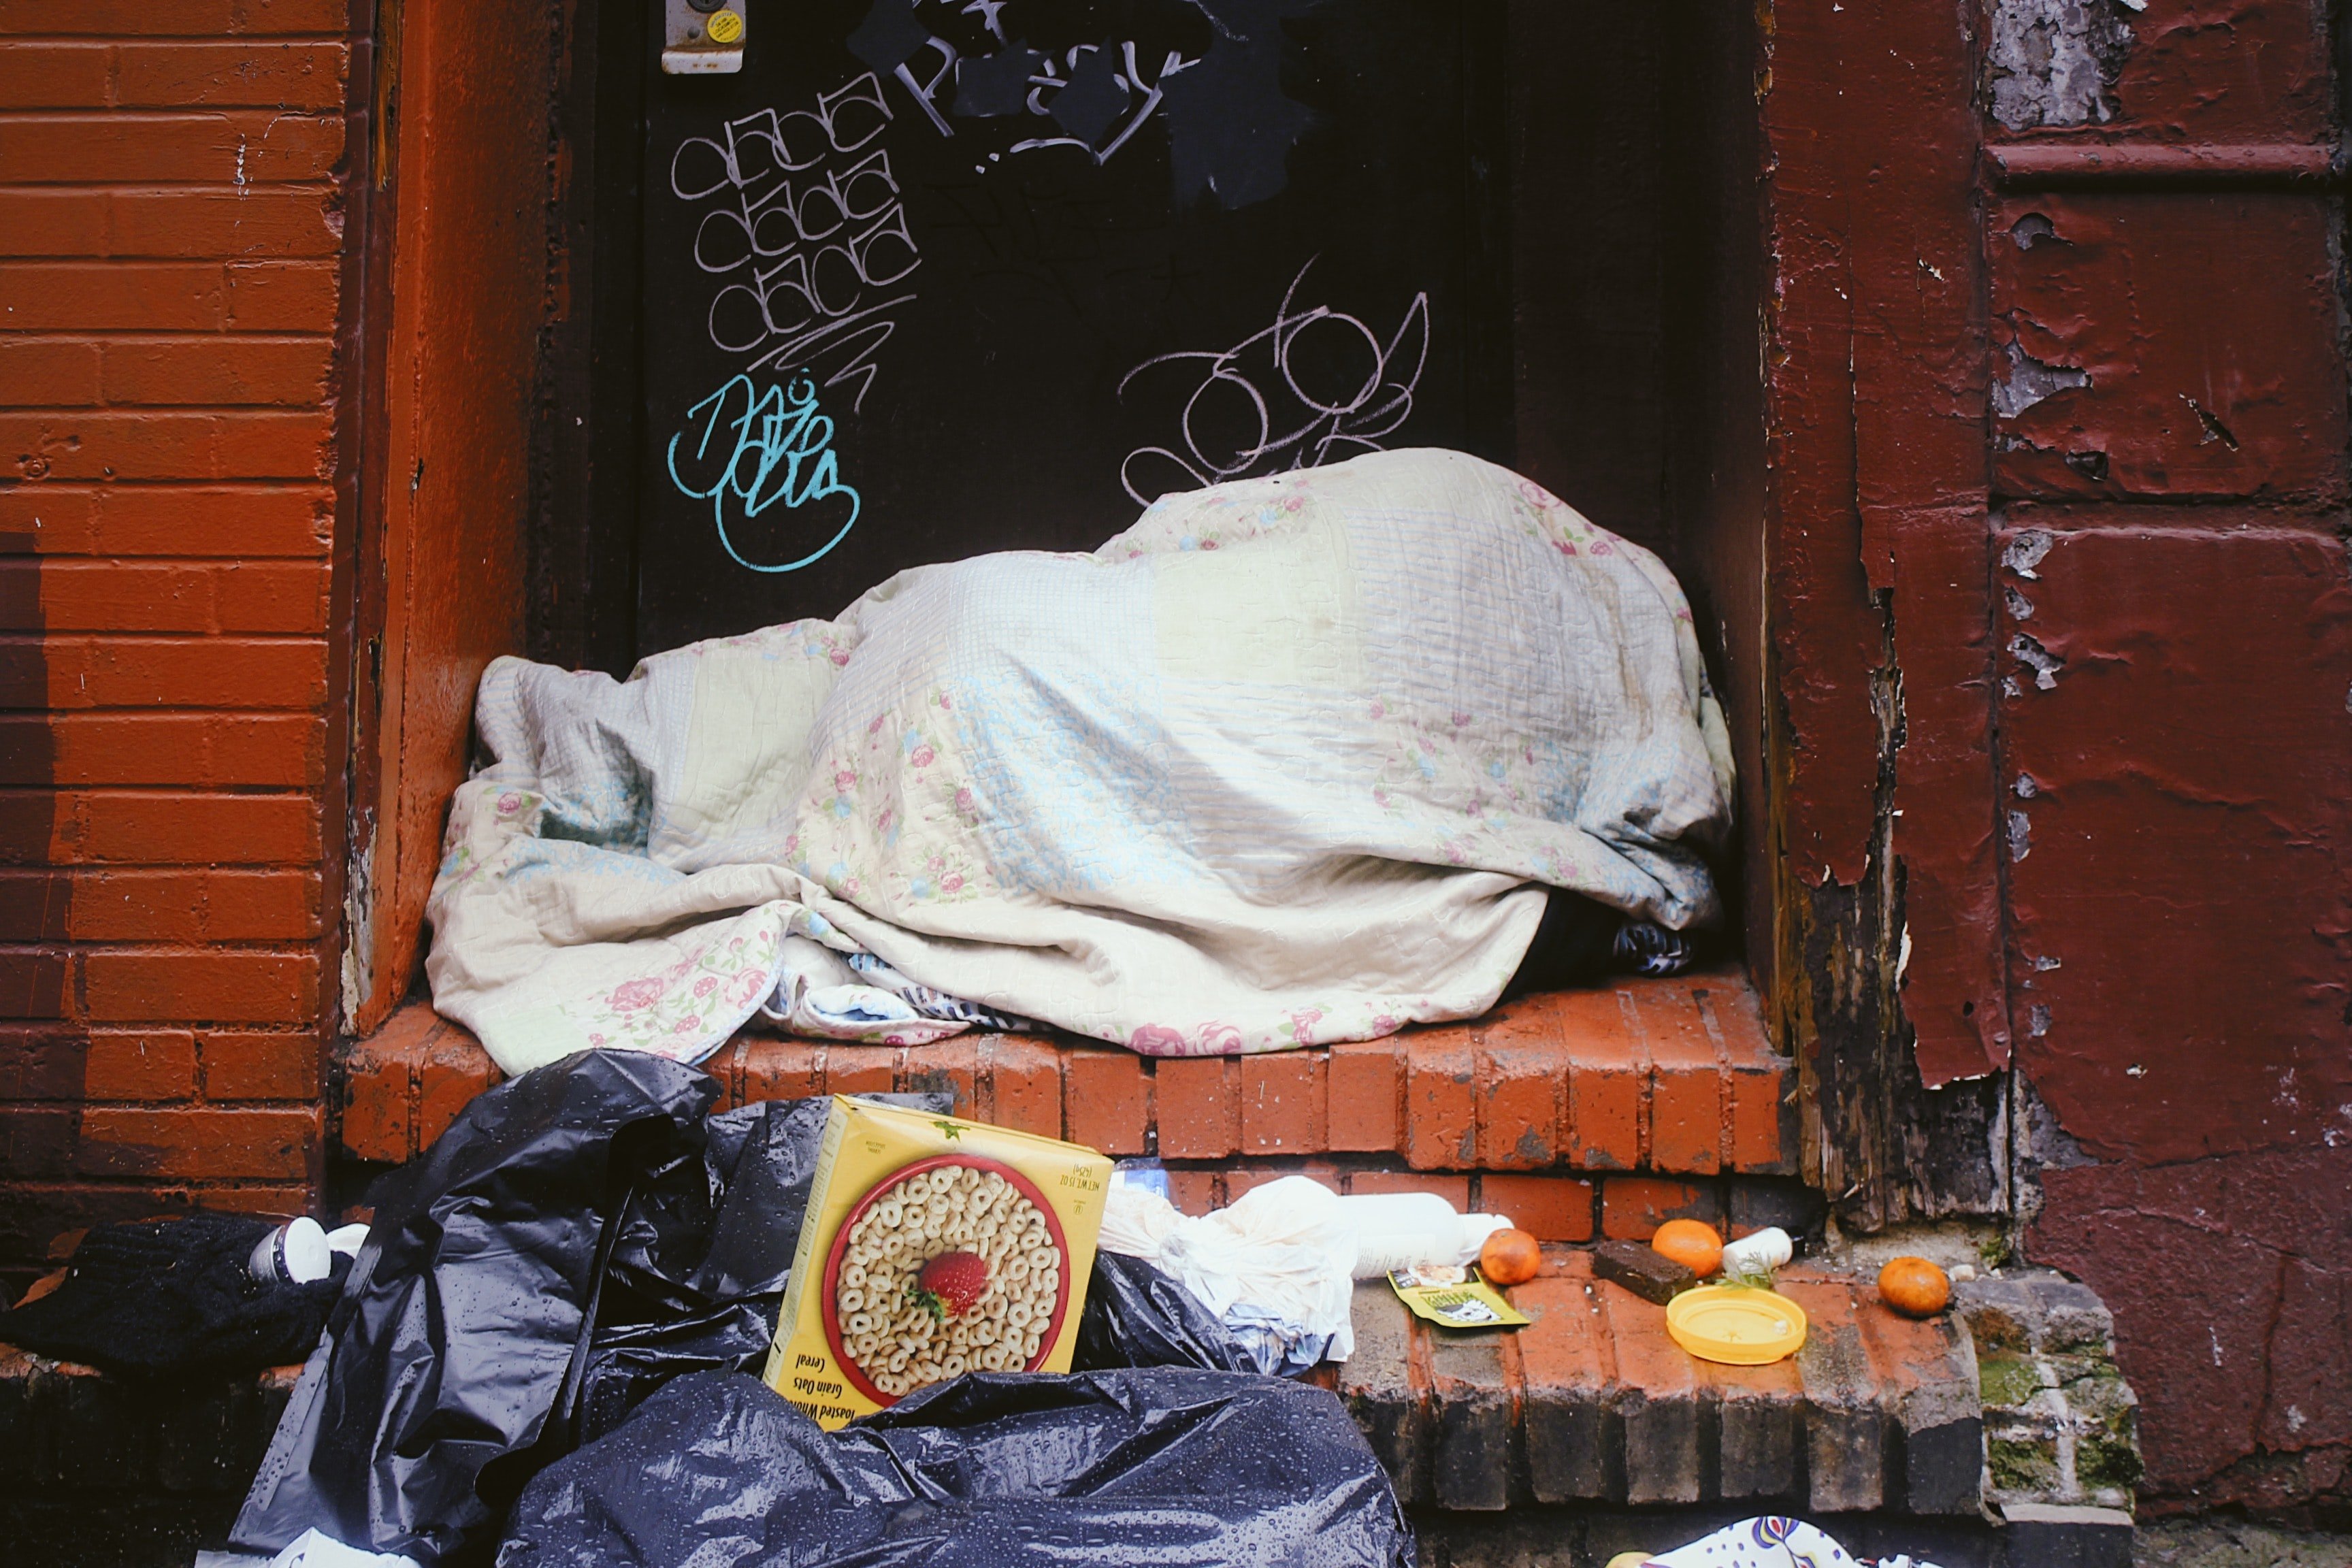 The homeless girl would sleep by a doorstep every night. | Source: Unsplash